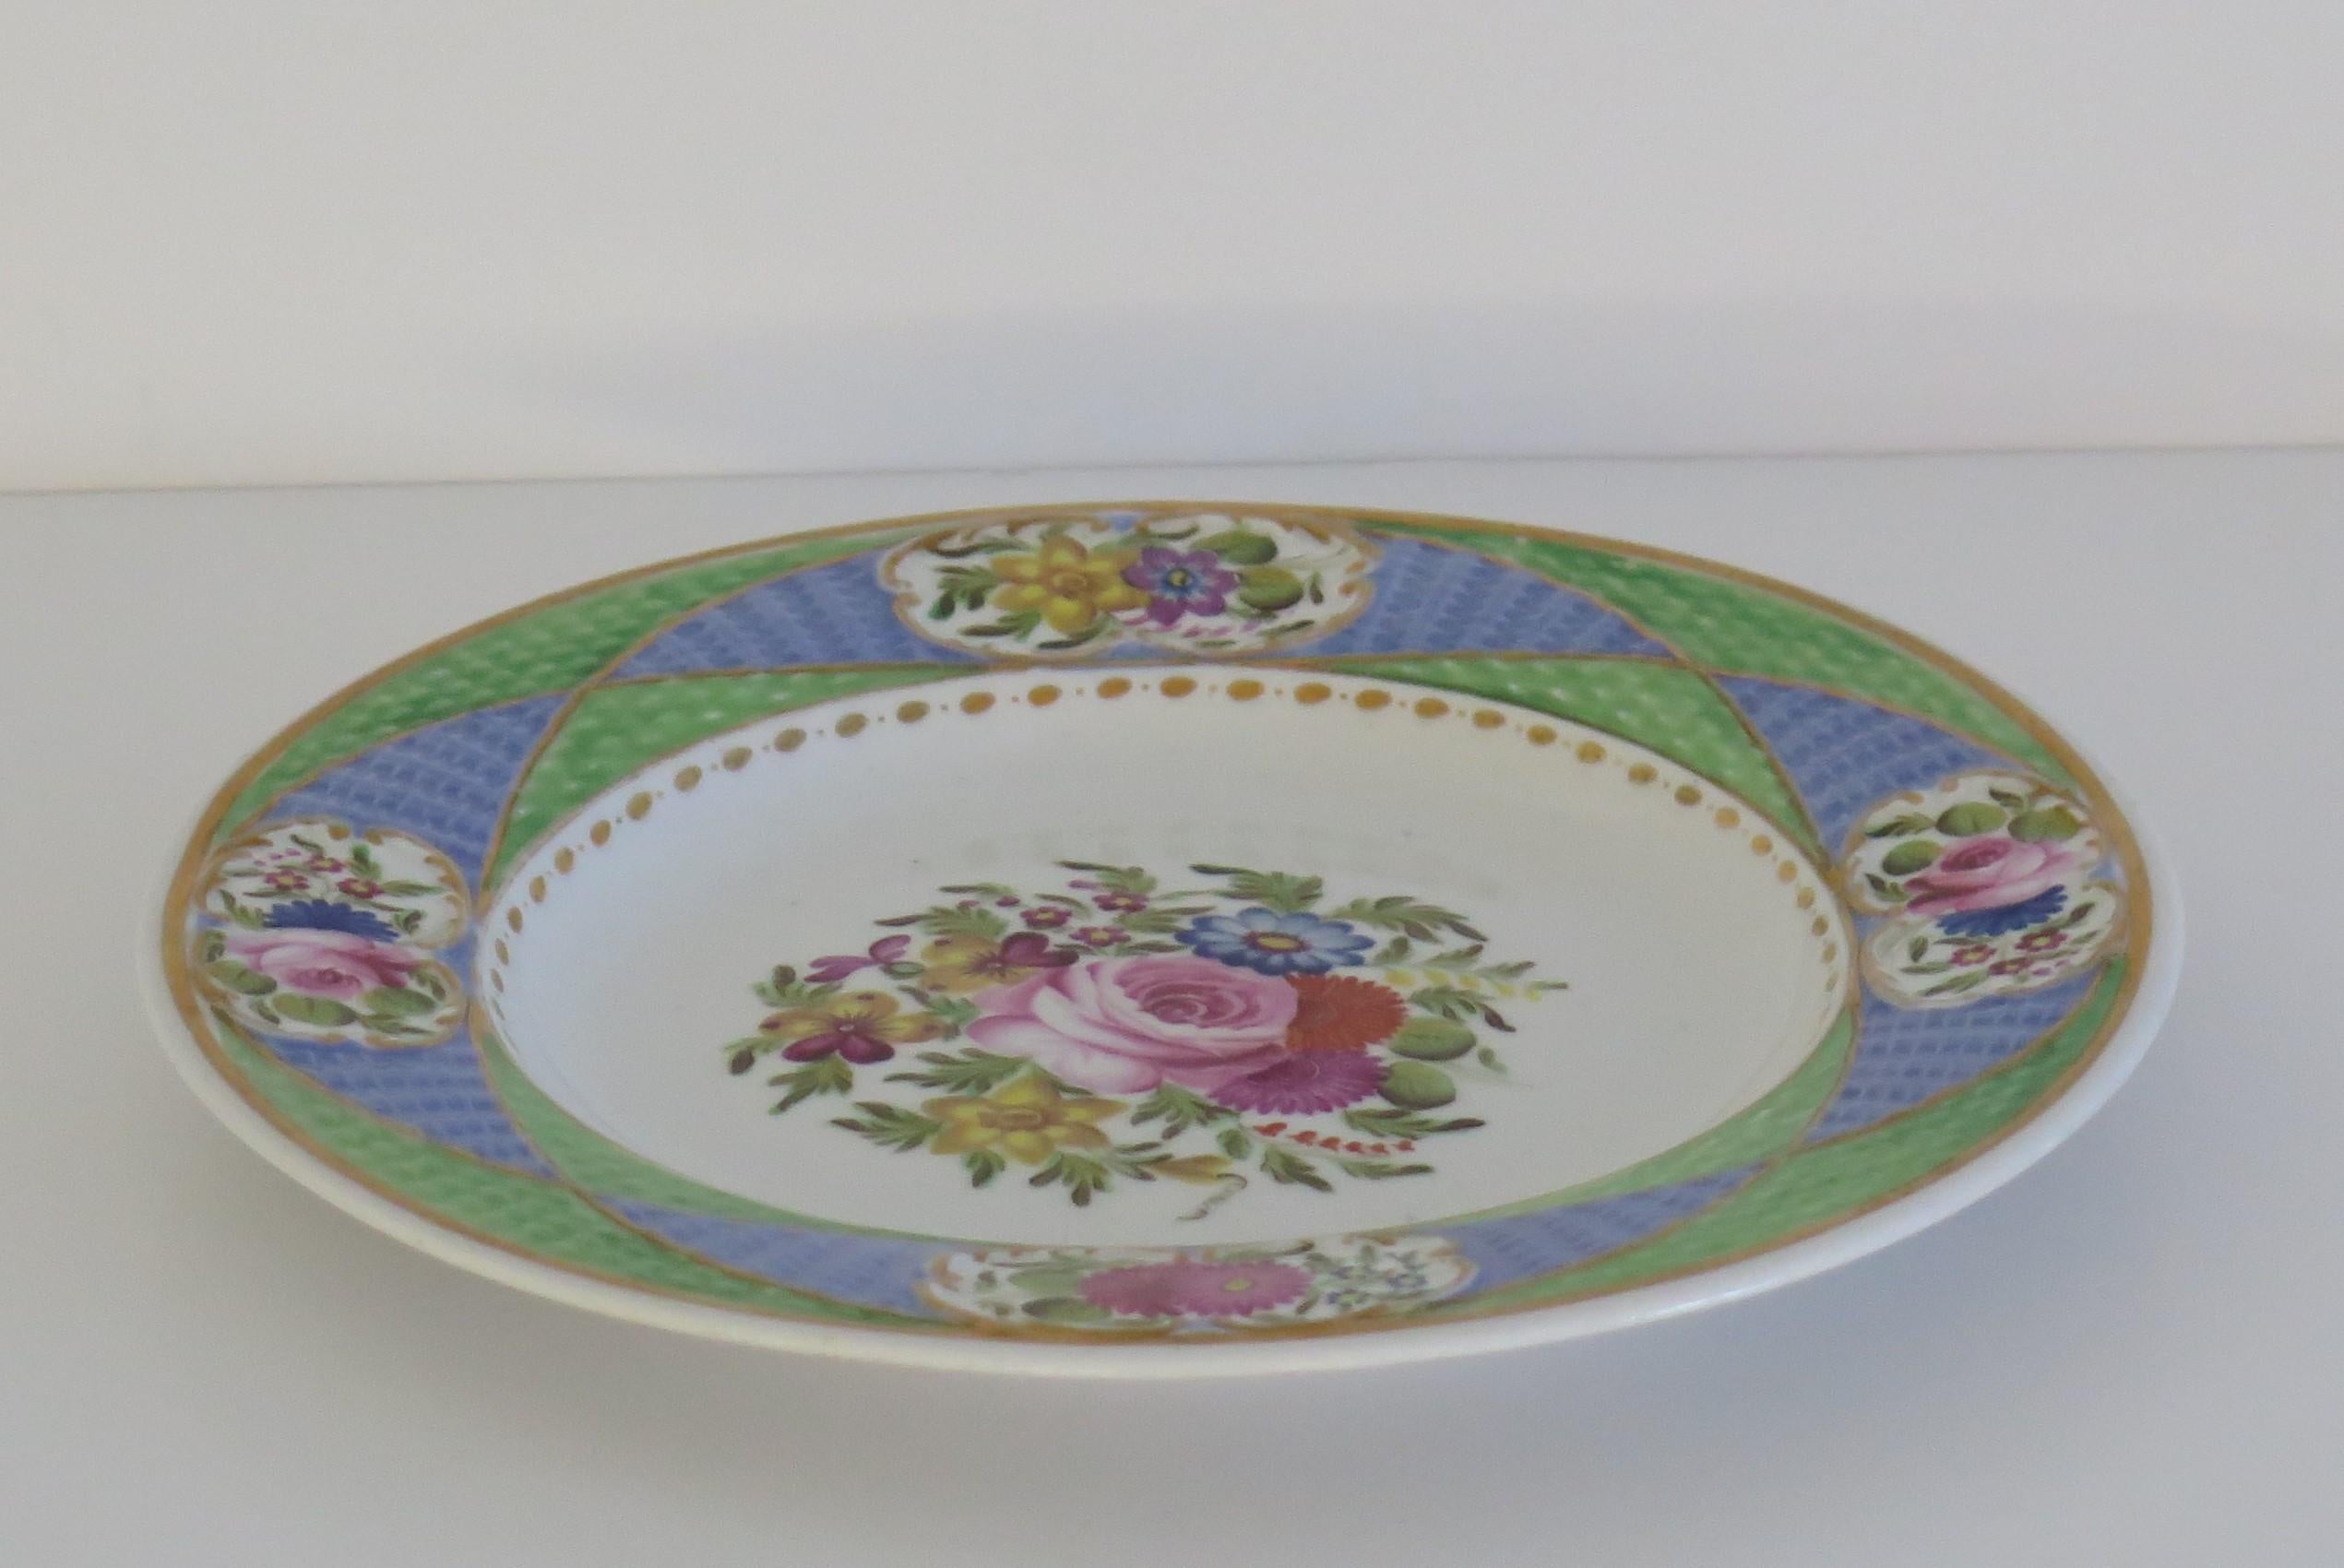 Fine Newhall Porcelain Plate Hand Painted Pattern 2050, Georgian circa 1820 For Sale 3